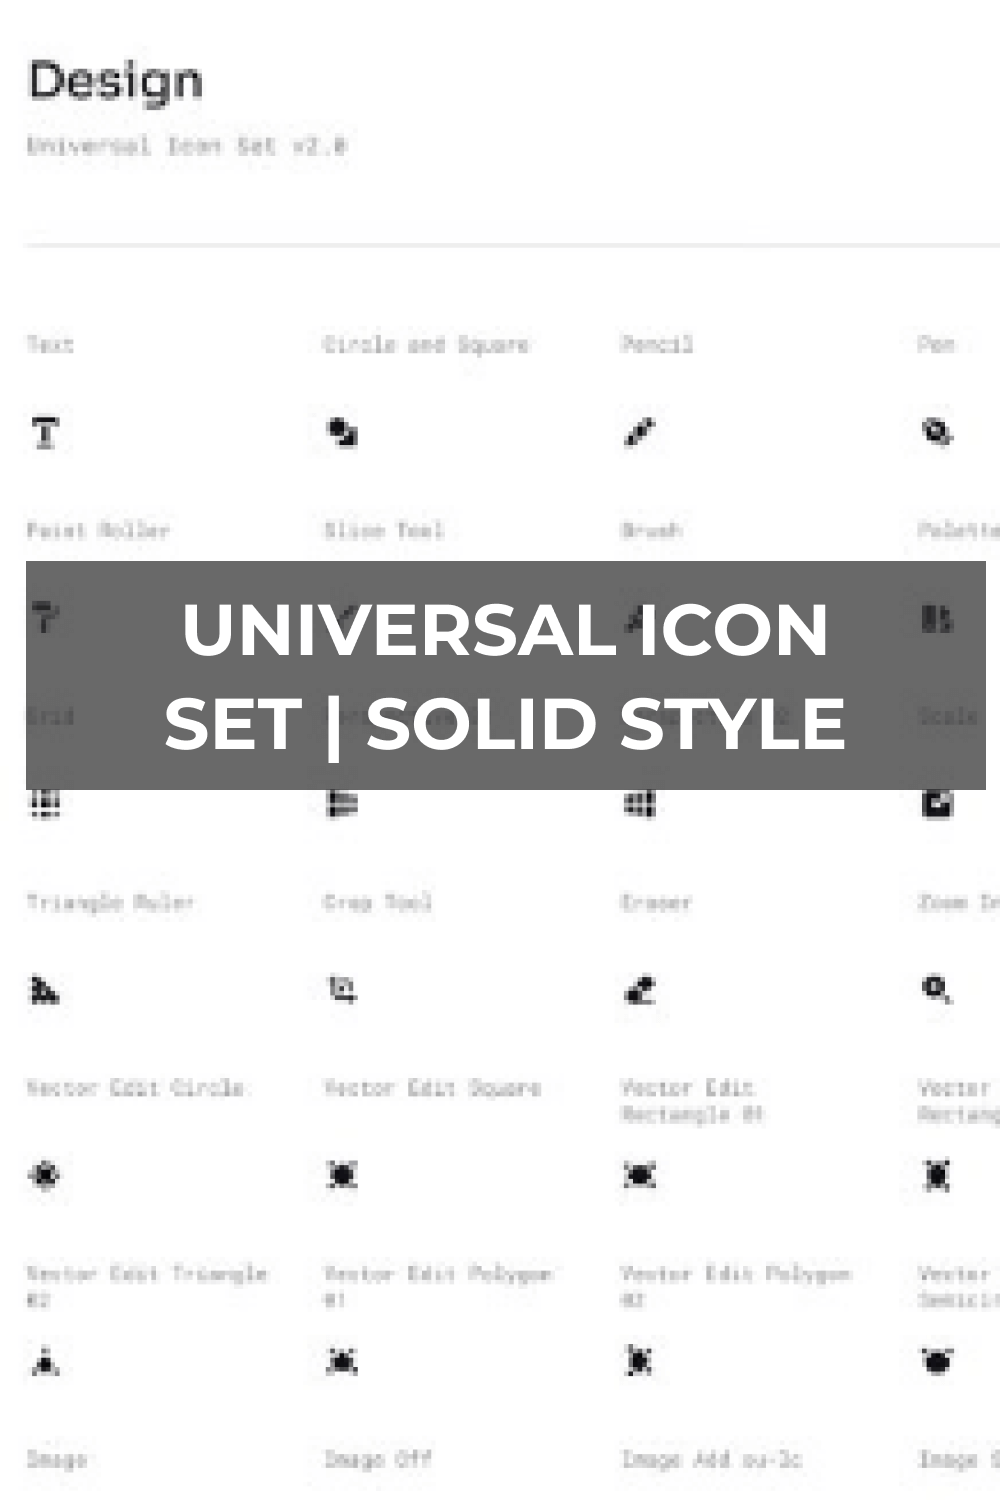 Universal Icon for Mobile.